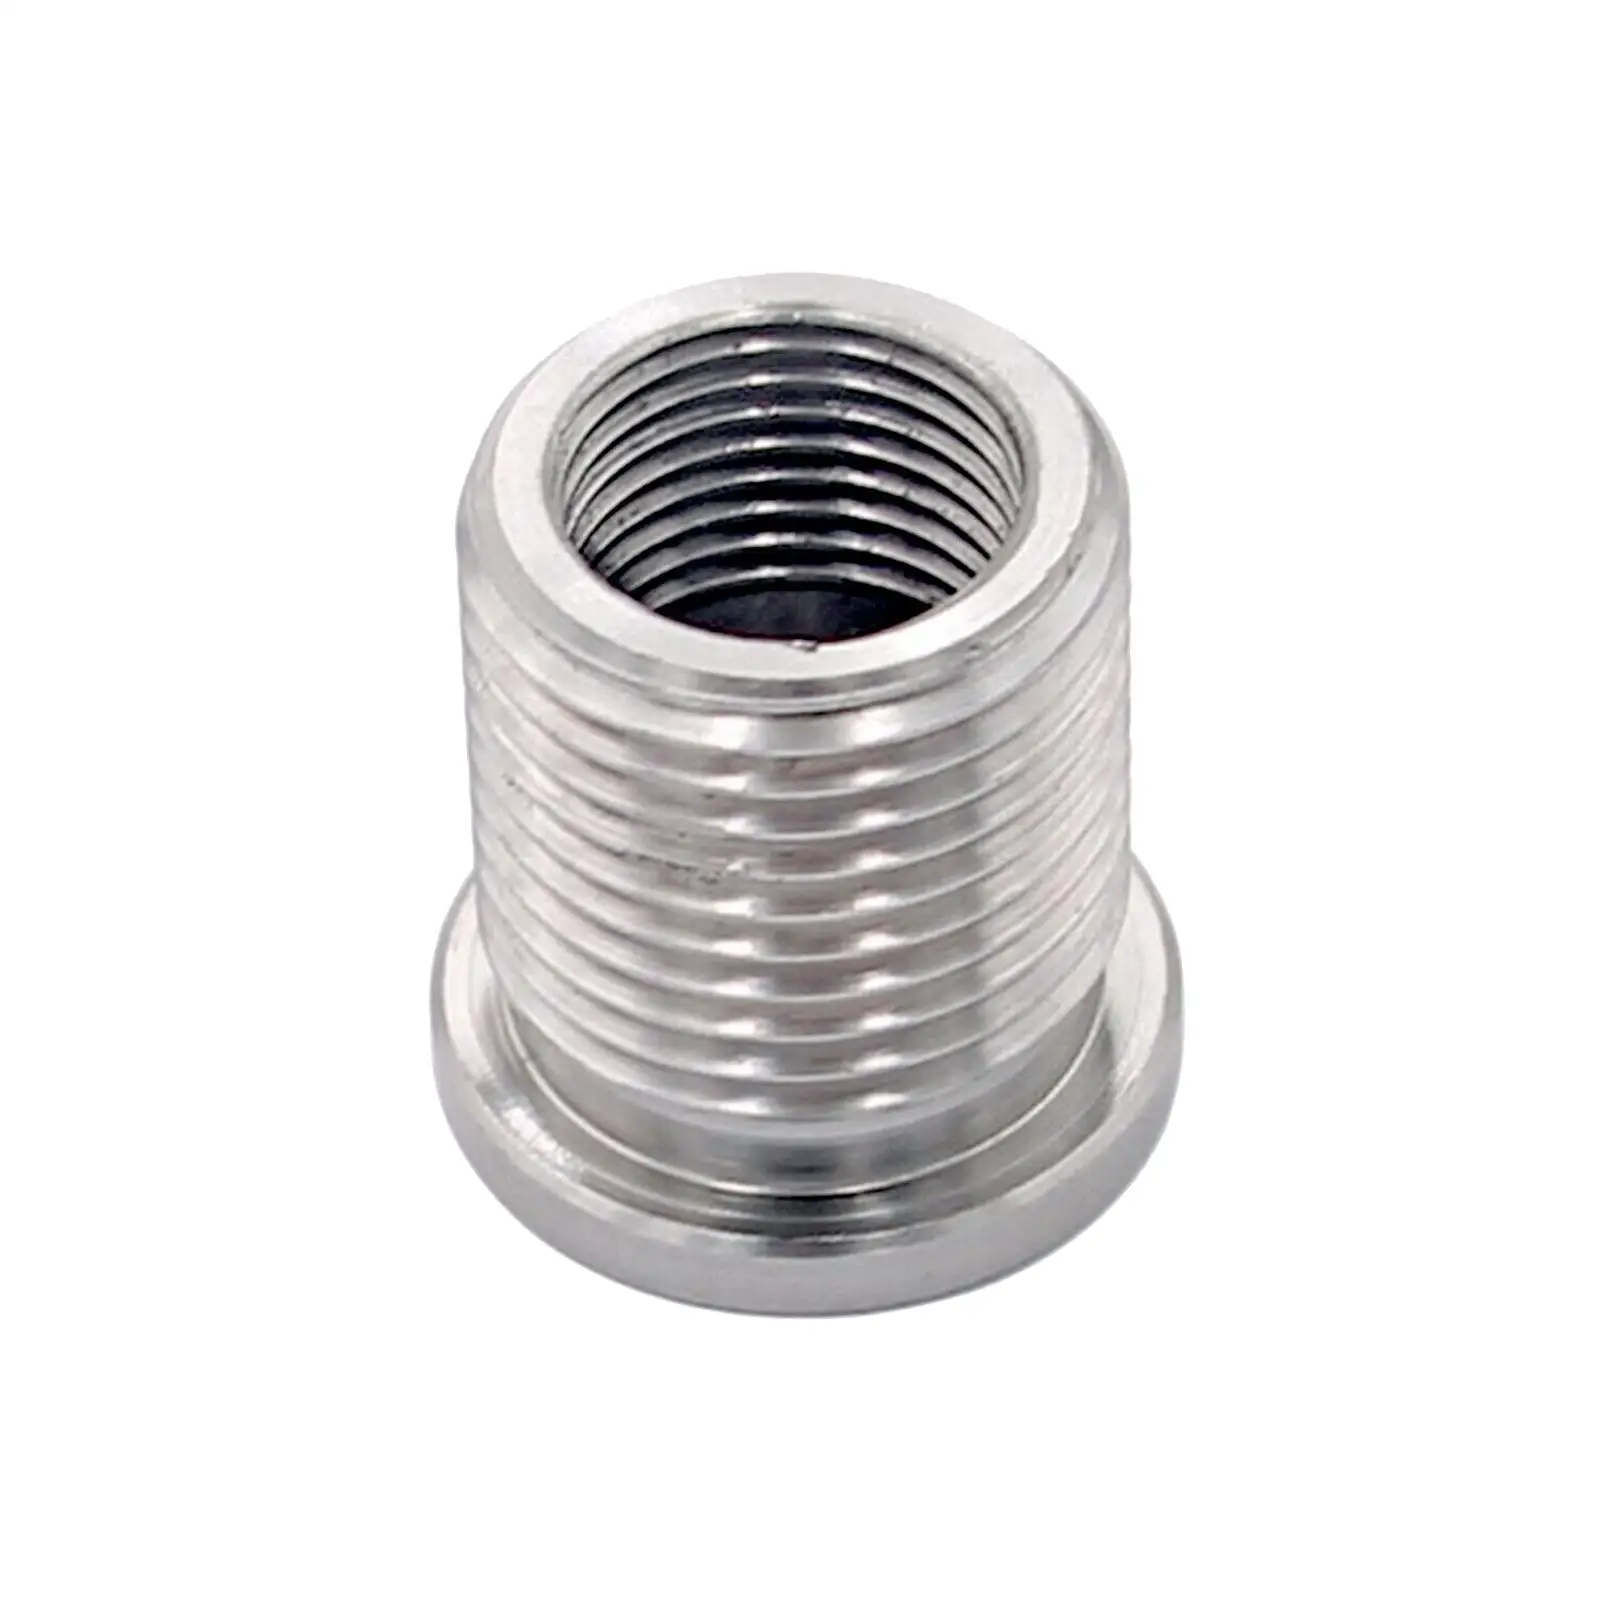 Spark Plug Insert Threads 389-100 for Ford Triton Two Valve Engines Car